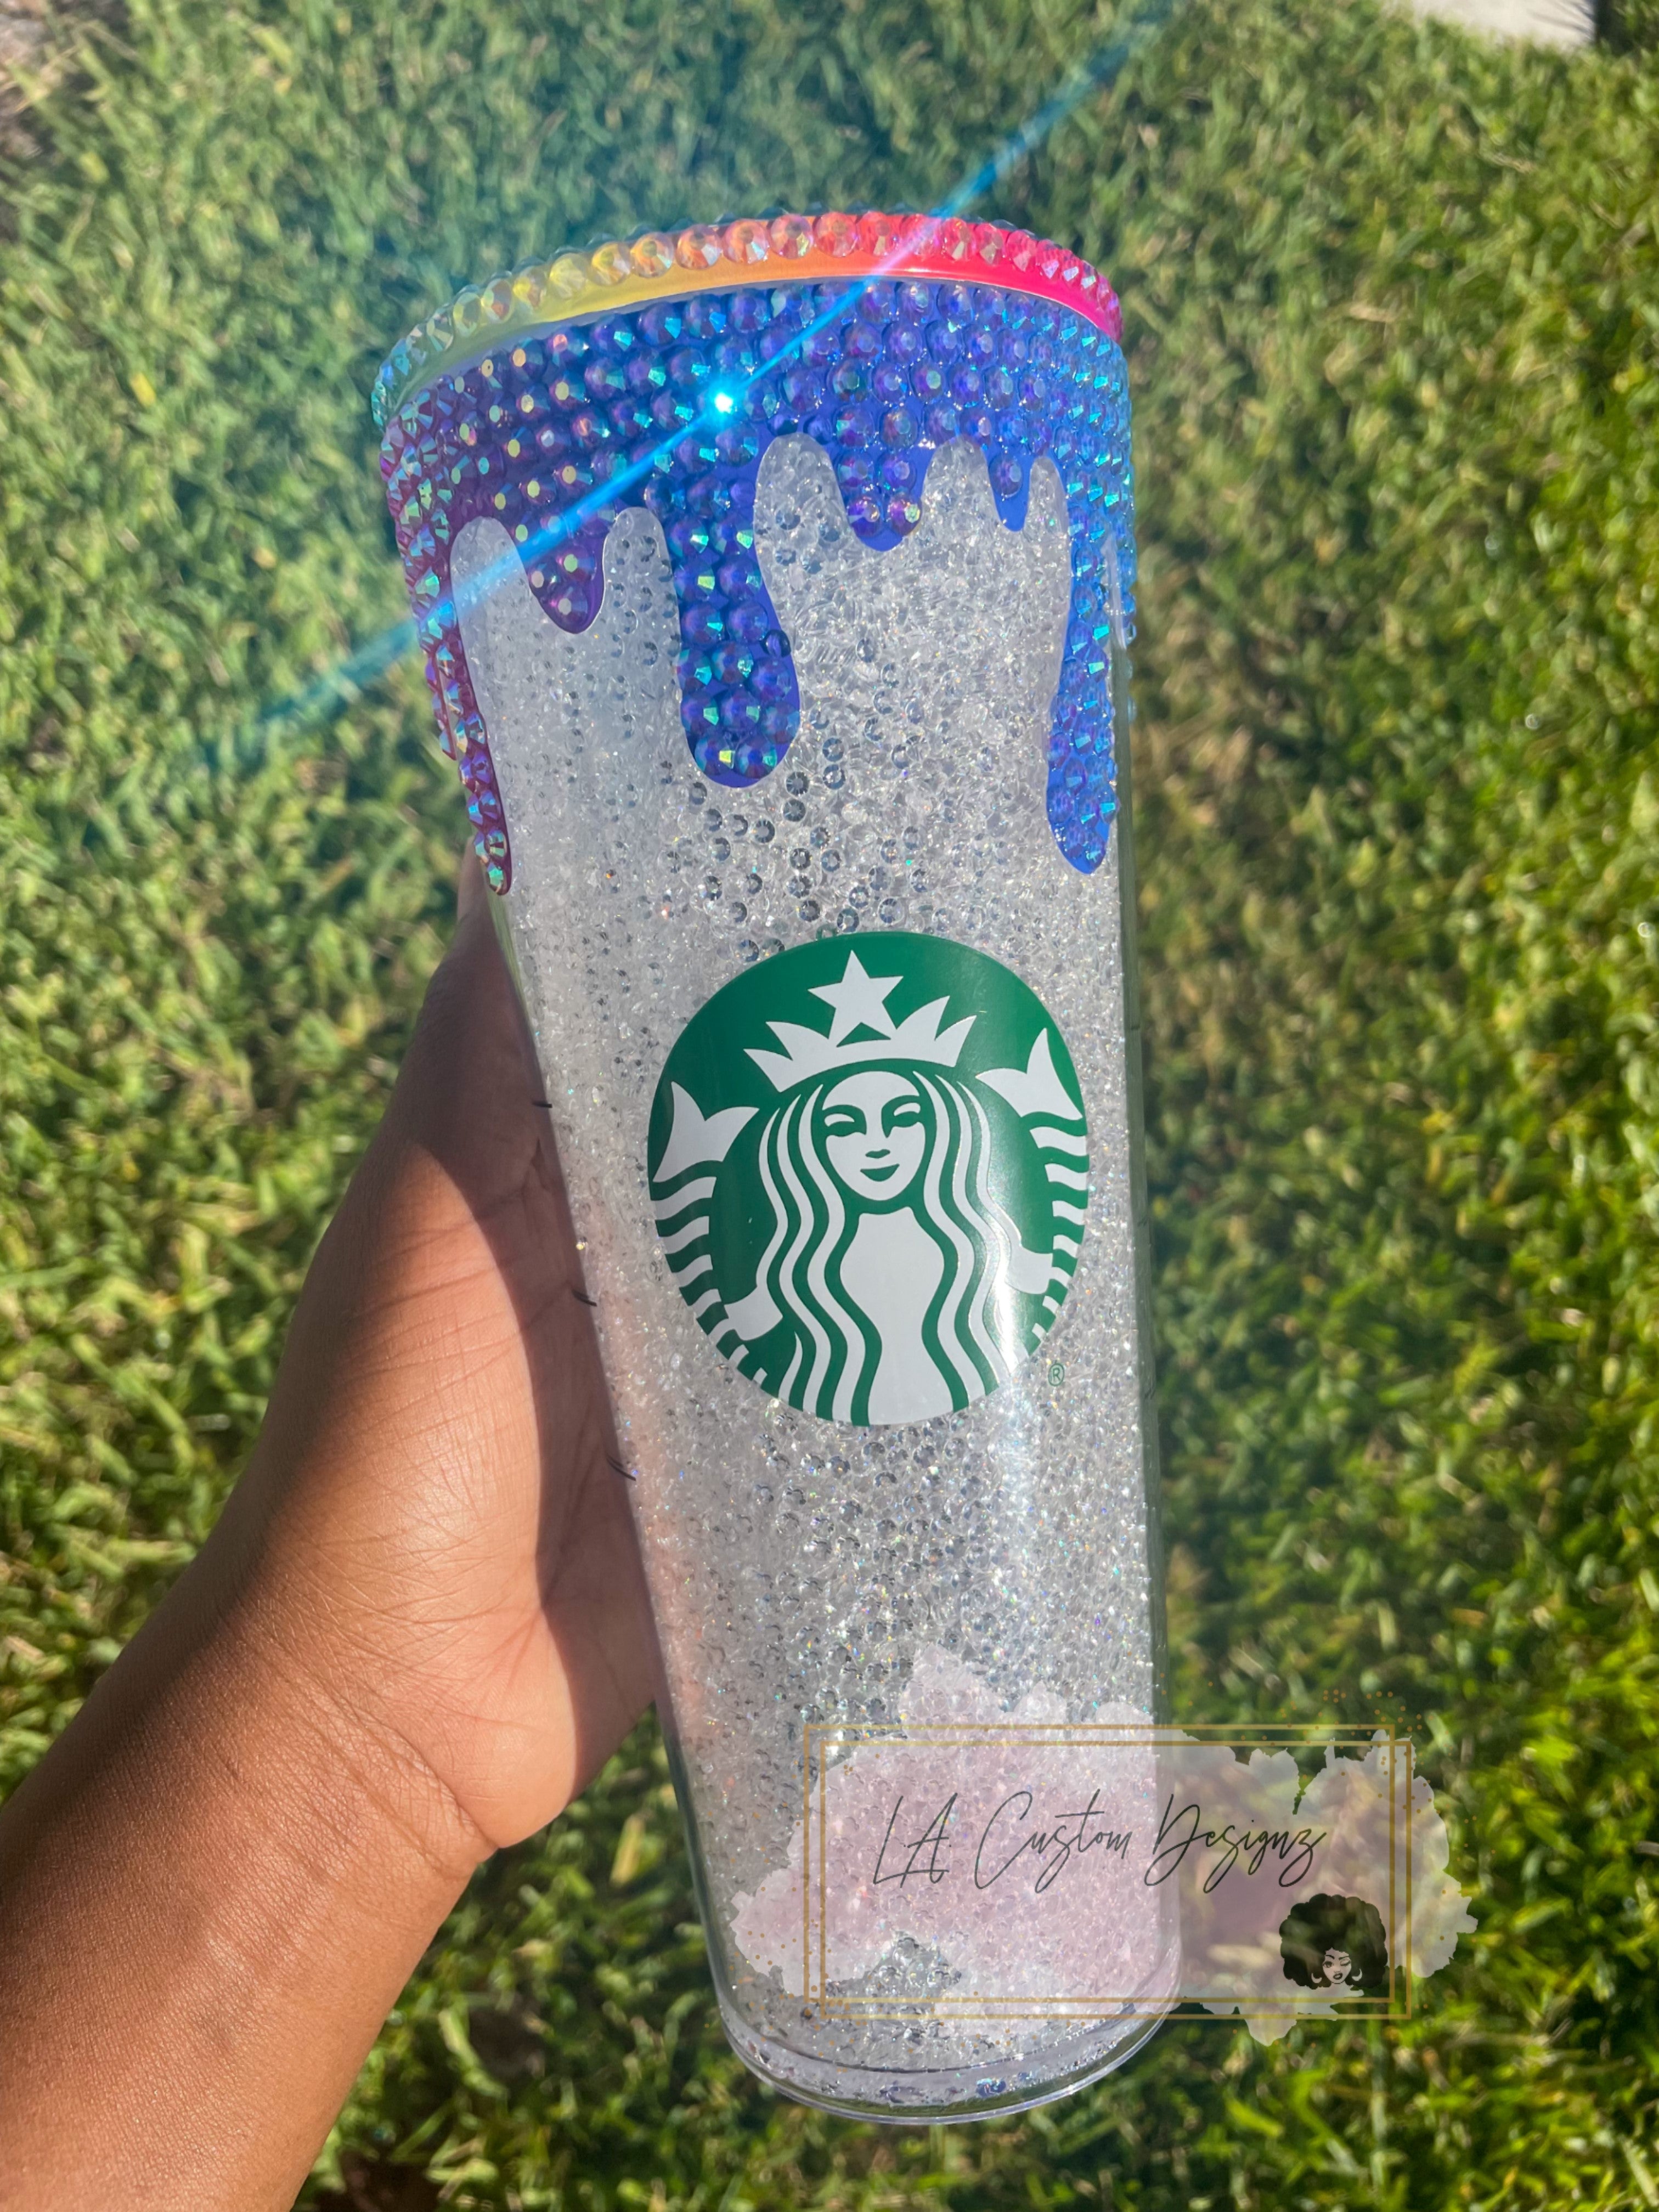 How To Make Glitter-Filled Starbucks Cold Cup!